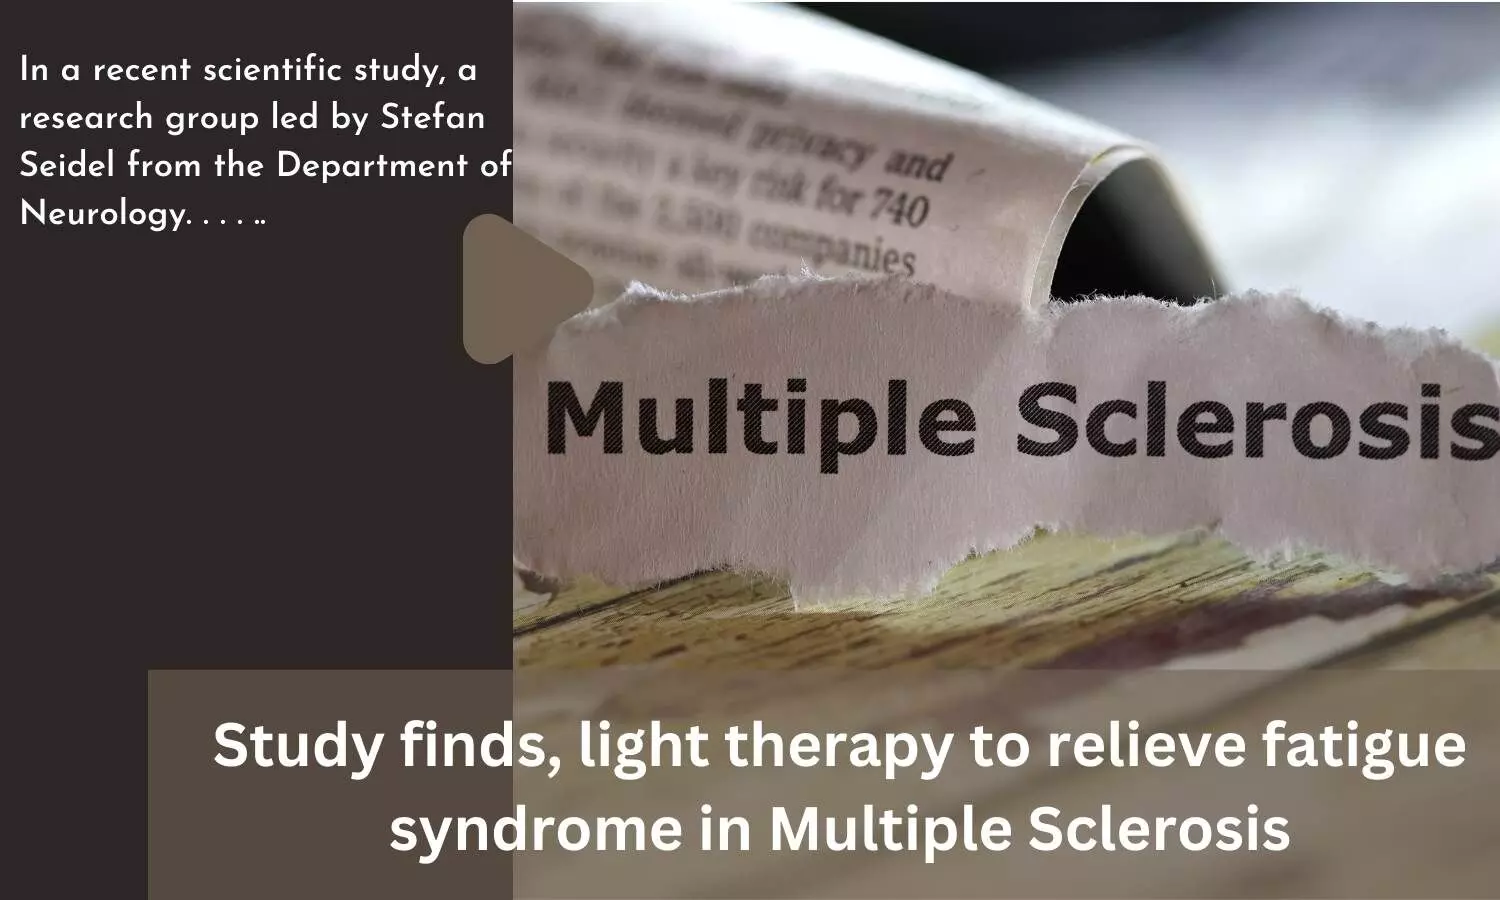 Study finds, light therapy to relieve fatigue syndrome in Multiple Sclerosis